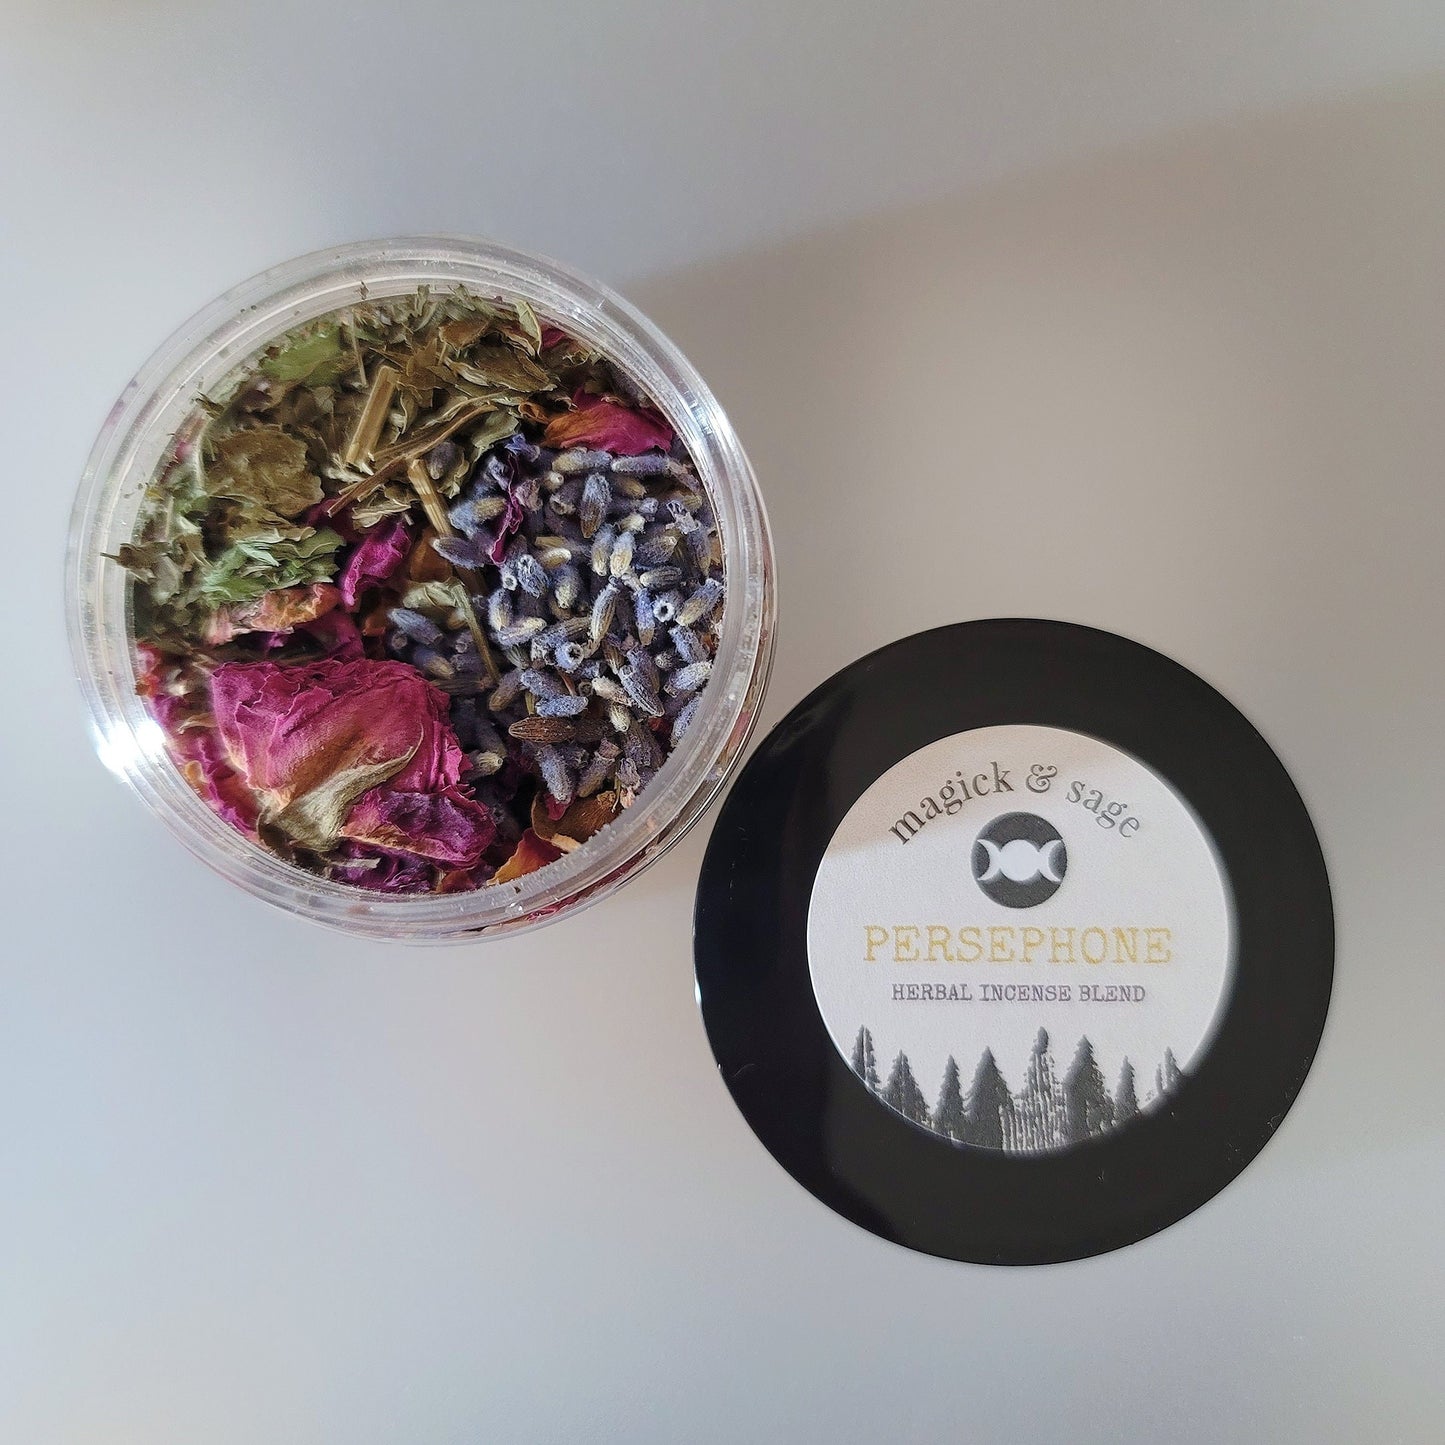 PERSEPHONE Herbal Incense Blend - work, connect, and honor Persephone - Goddess of Spring, Queen of the Underworld - Shrine & Altar Tools